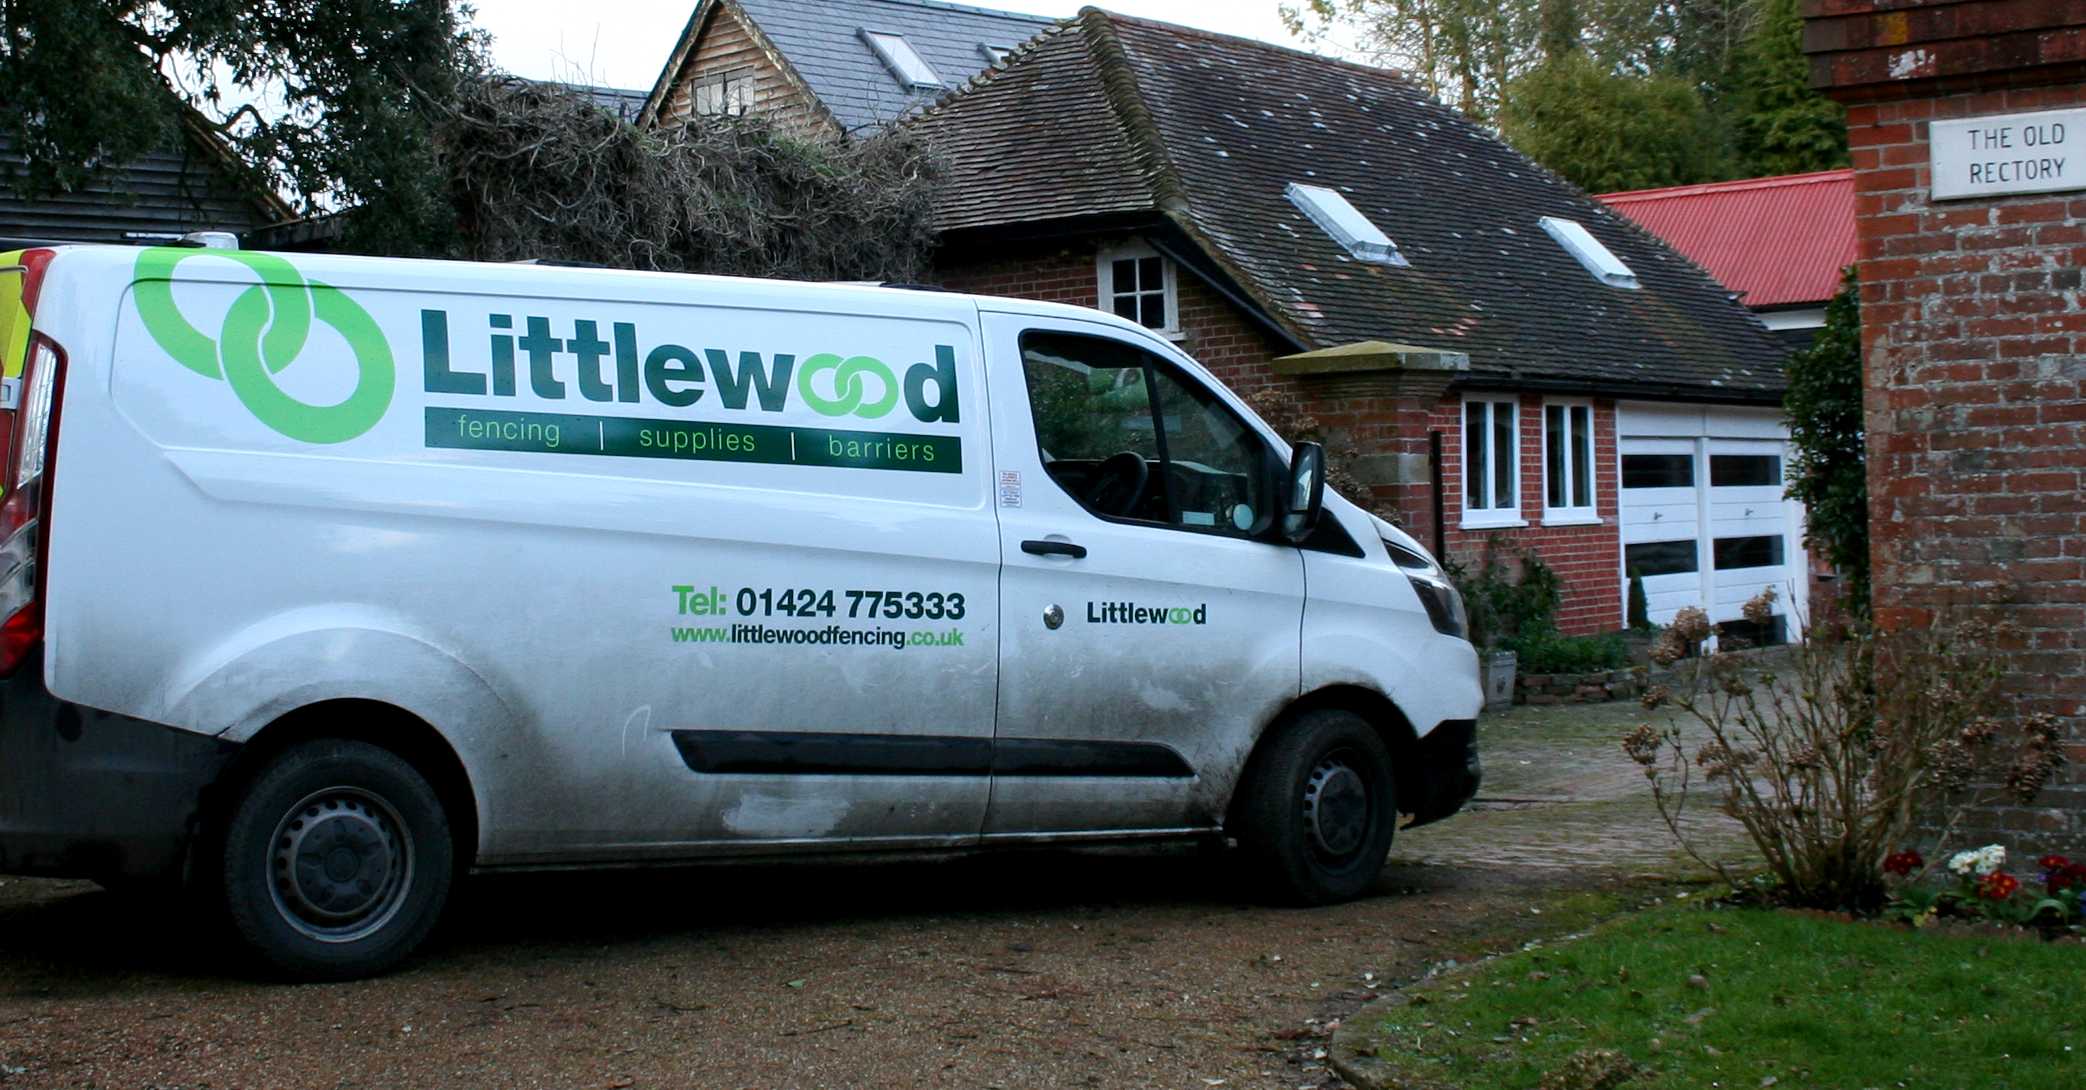 Littlewood fencing supplies company limited telephone 01424 775333